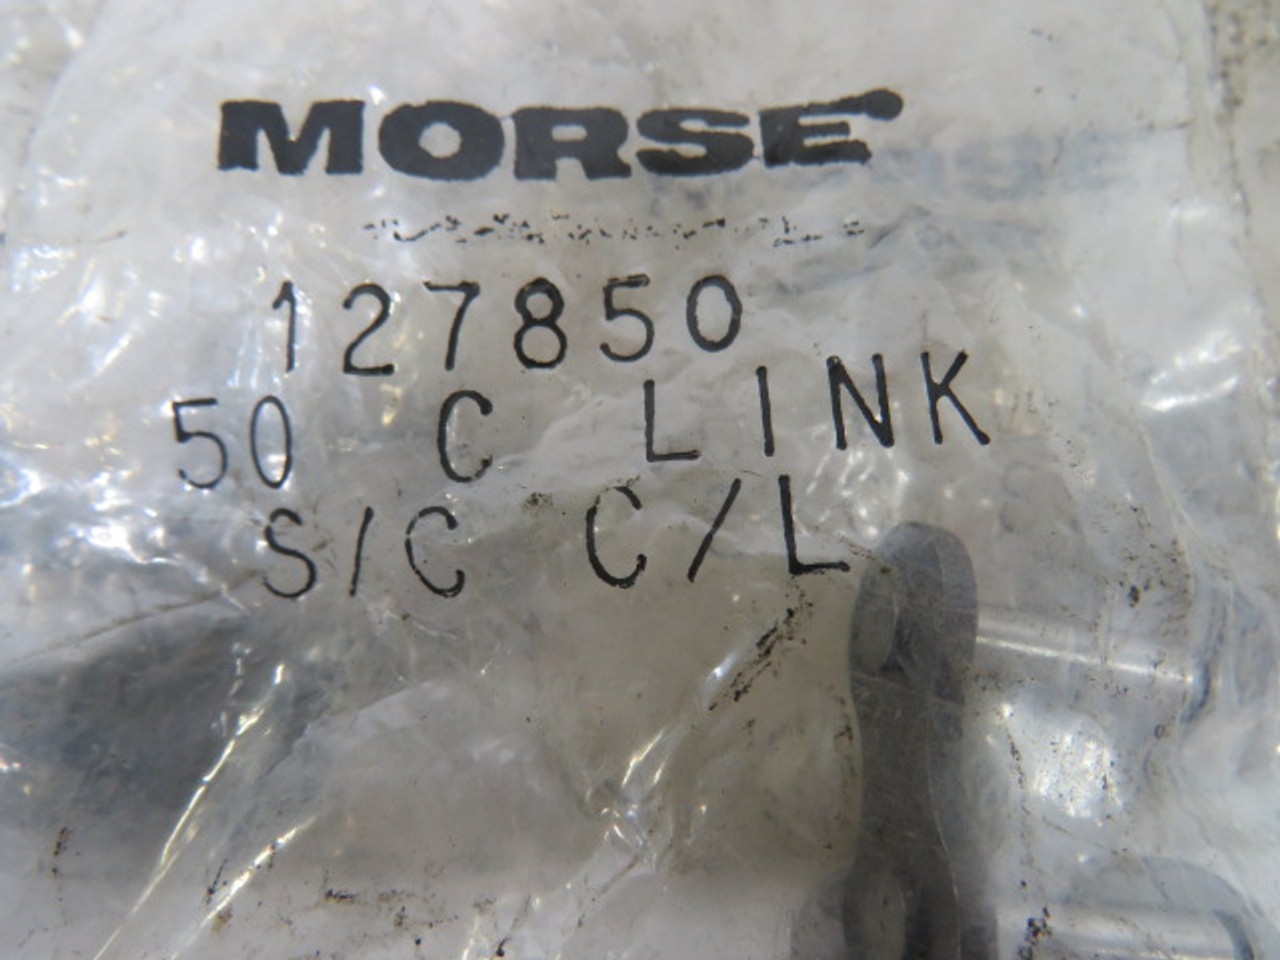 Morse 50-S/C-C/L Connecting Link 5/8"P .3750"W Lot of 4 ! NWB !